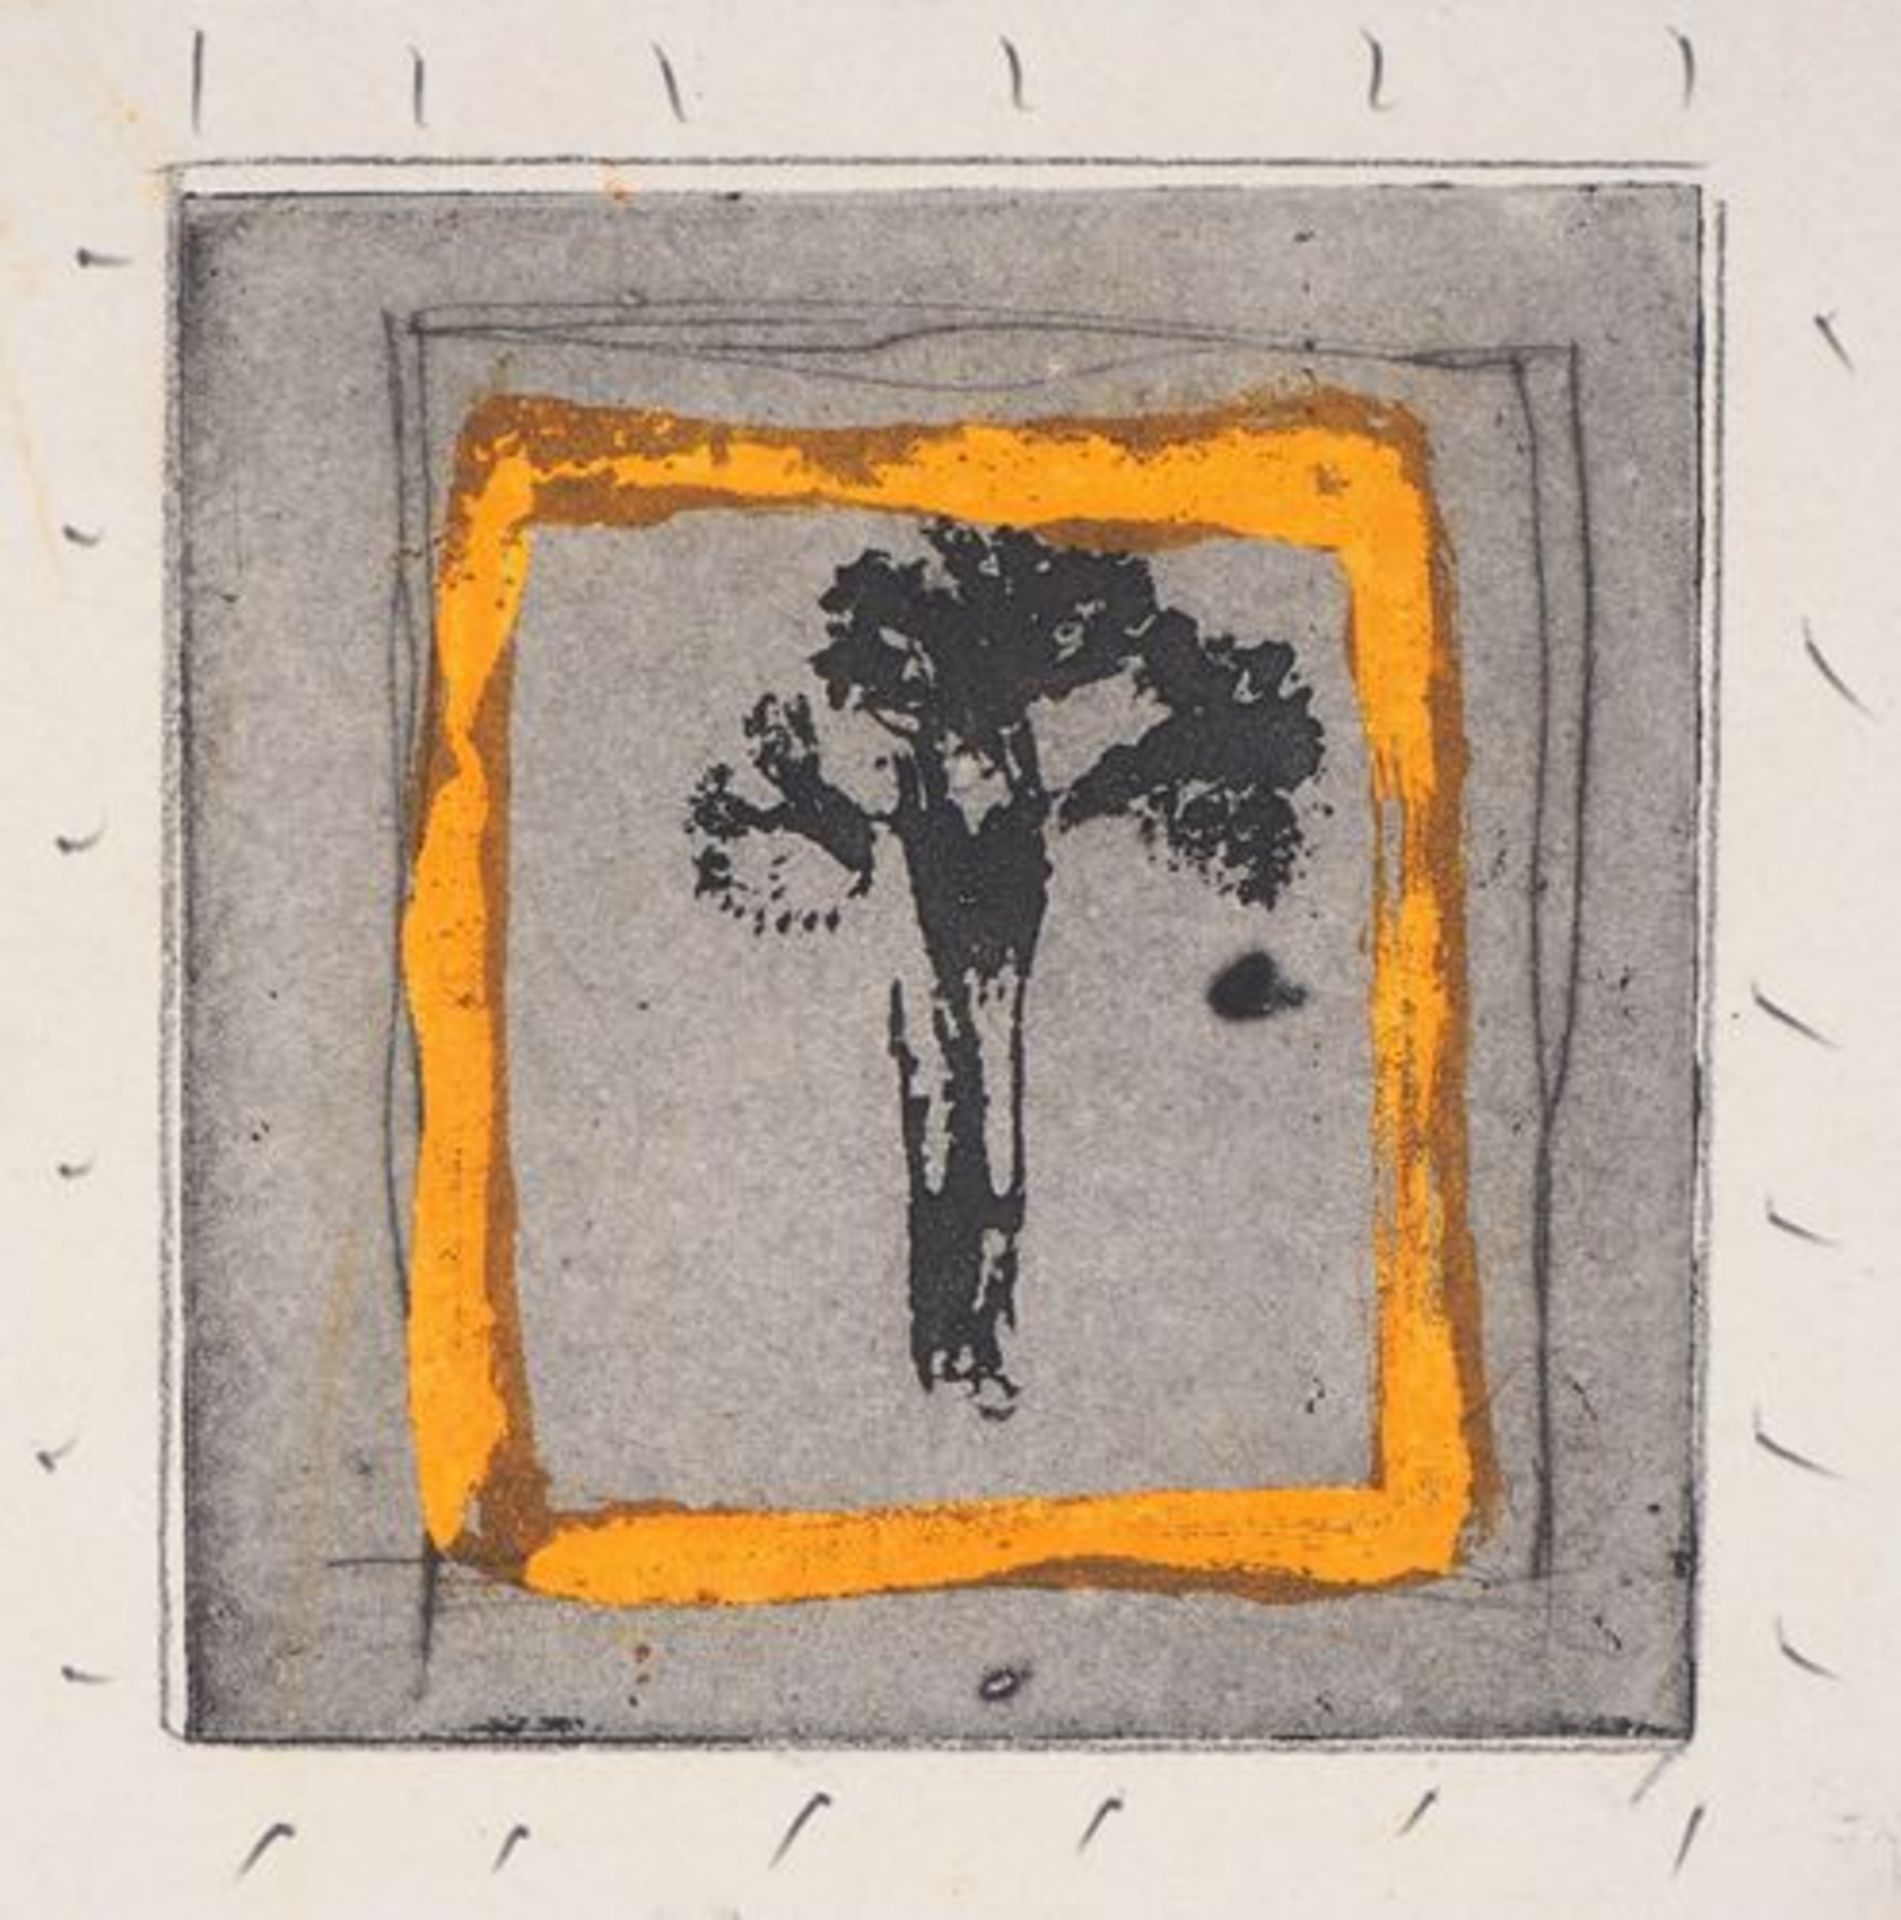 Didier HAGEGE Broccolis, 1997 Enhanced etching on vellum Signed in pencil Dated, [...]